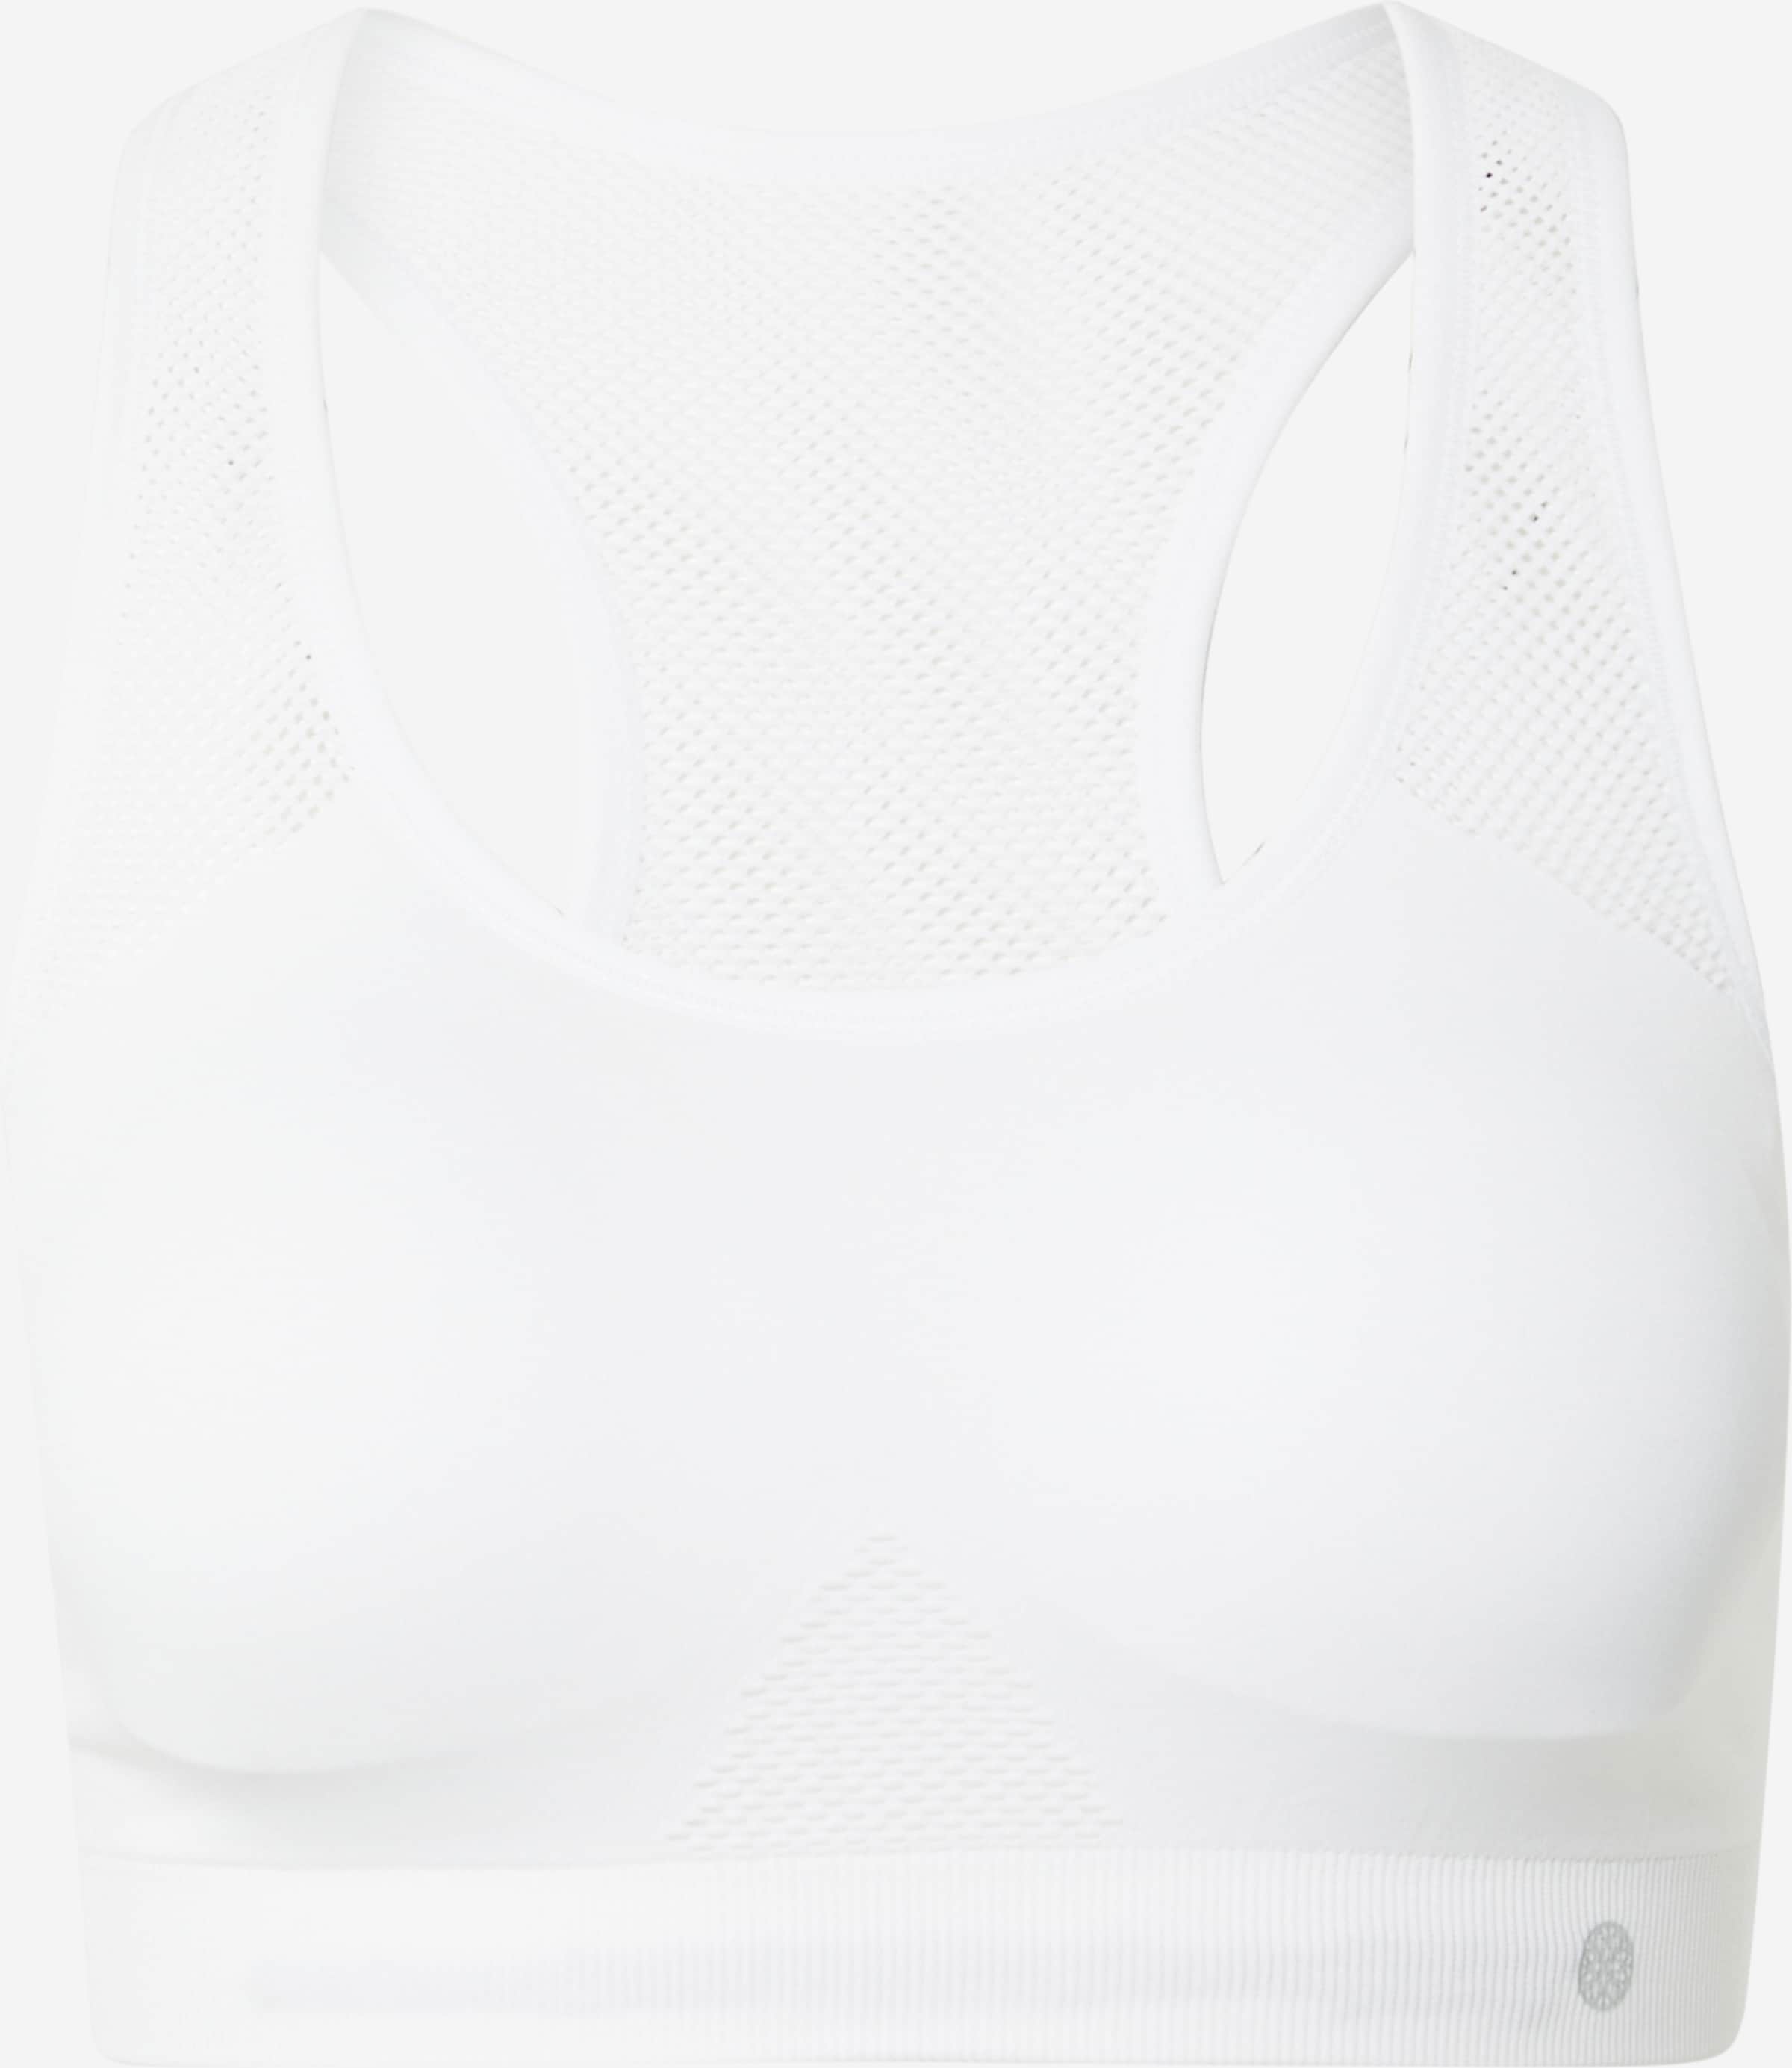 Athlecia Bustier Sport-BH 'Rosemary' in Weiß | ABOUT YOU